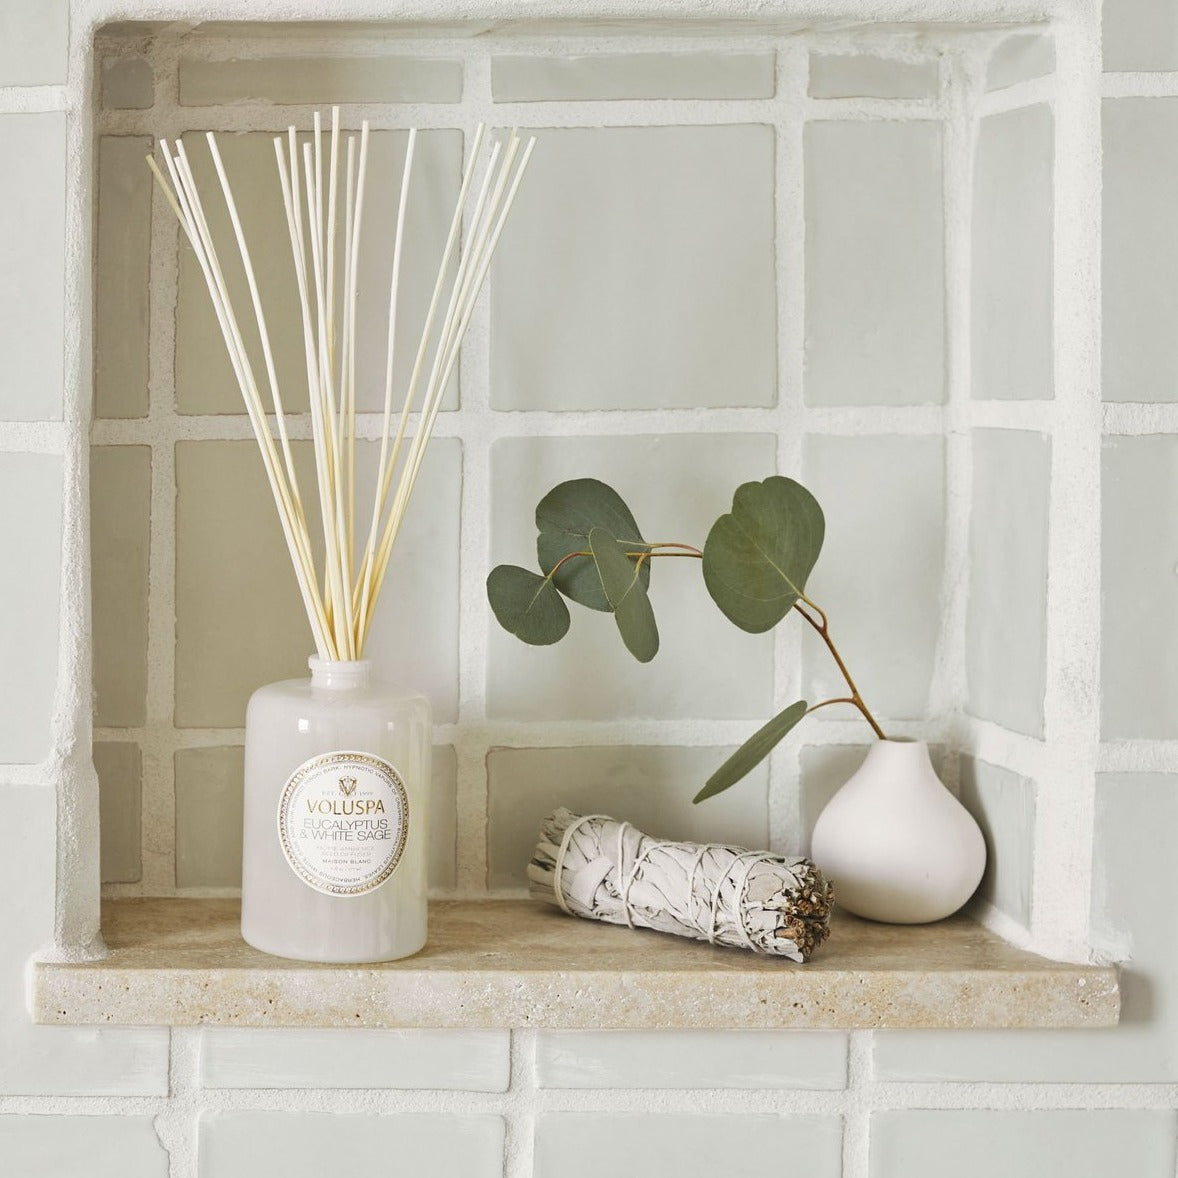 Diffuser in shower alcove with sage smudge stick and eucalyptus branch in bud vase.